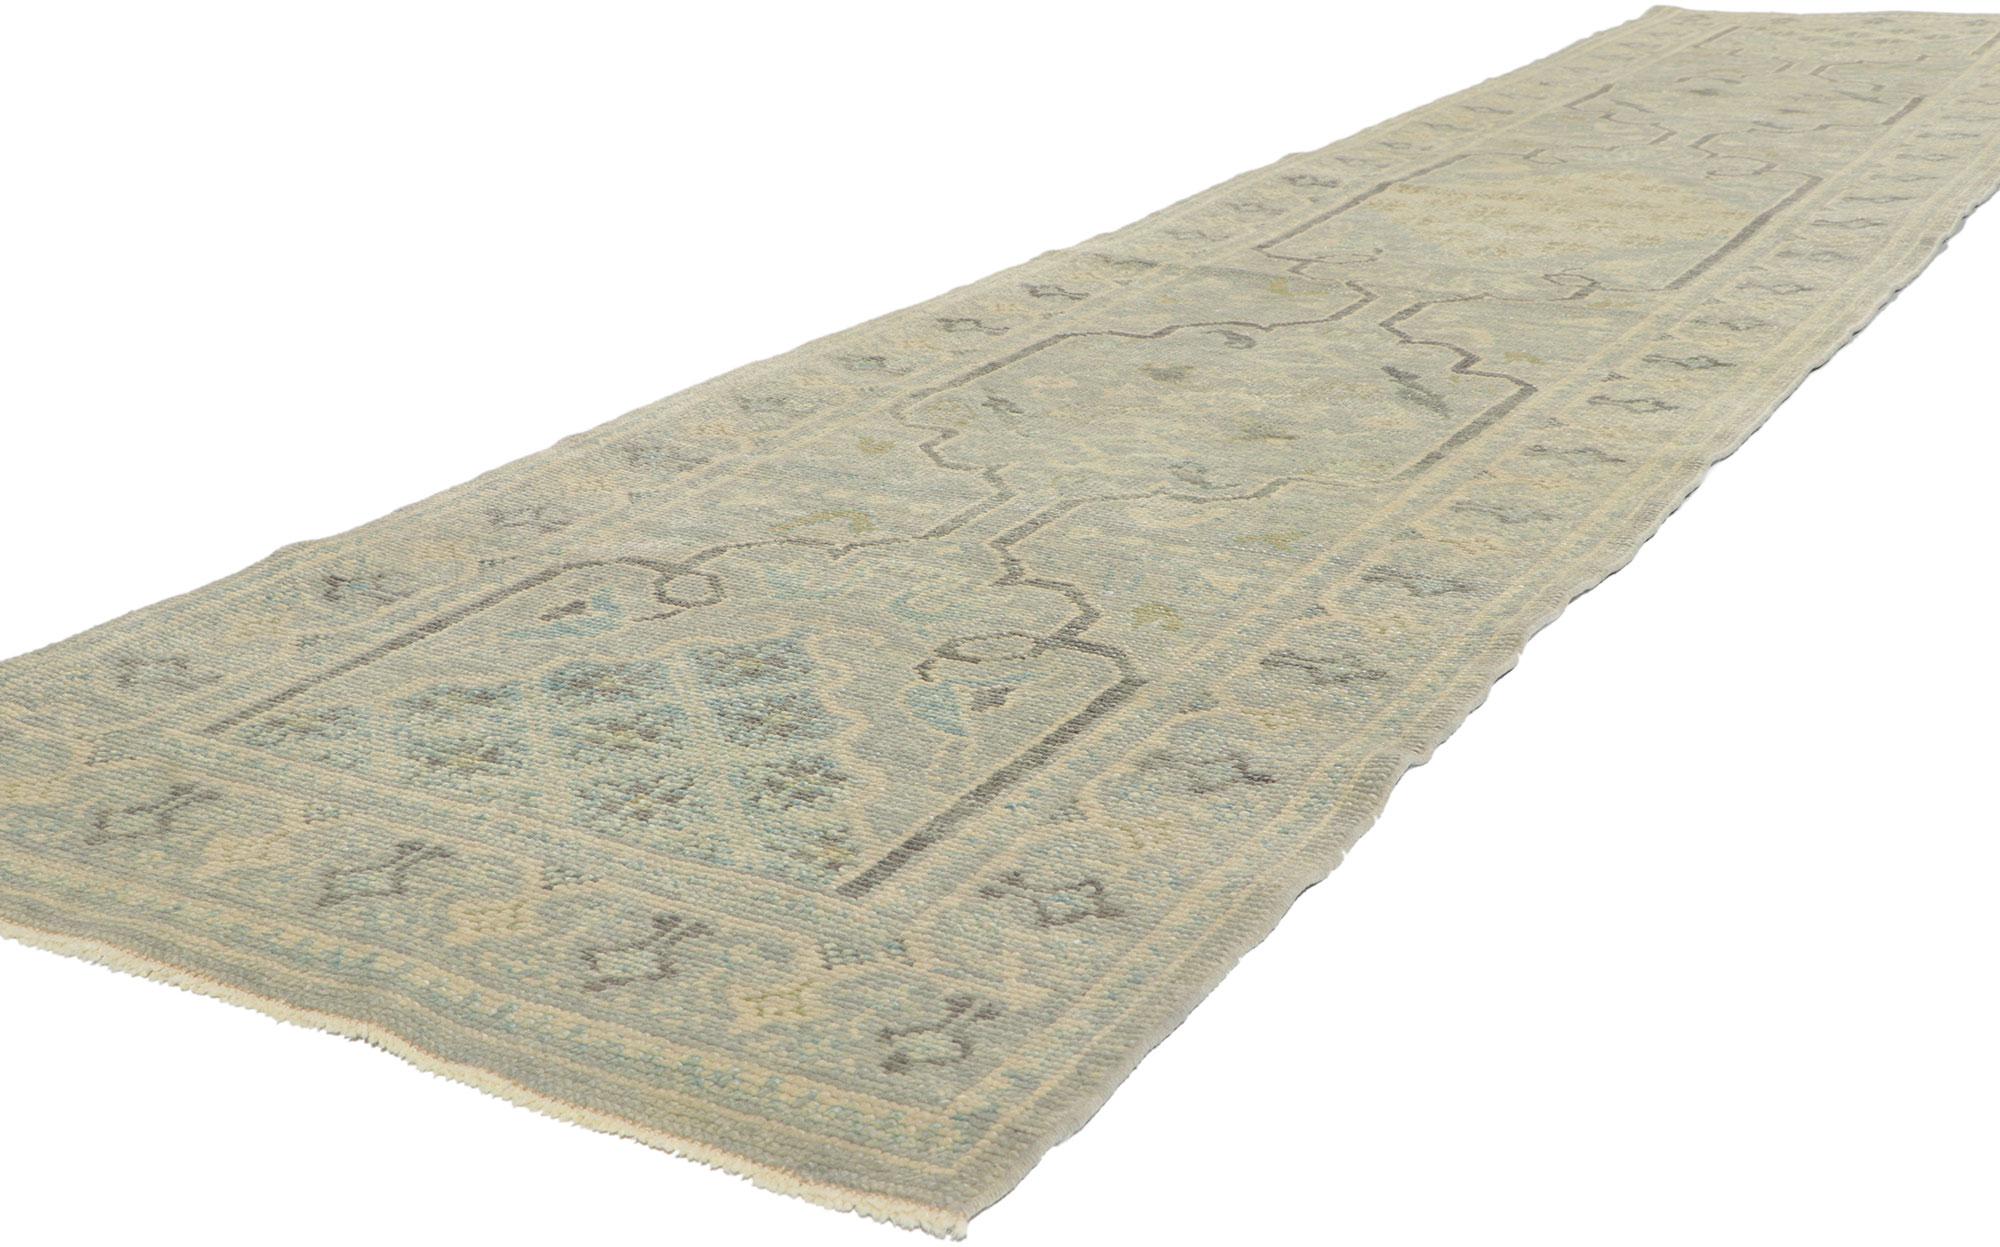 53789 New Contemporary Turkish Oushak Hallway Runner with Modern Style 03'01 x 14'04. This hand-knotted wool contemporary Turkish Oushak runner features an all-over mosaic style pattern composed of geometric botanical motifs spread across the baby